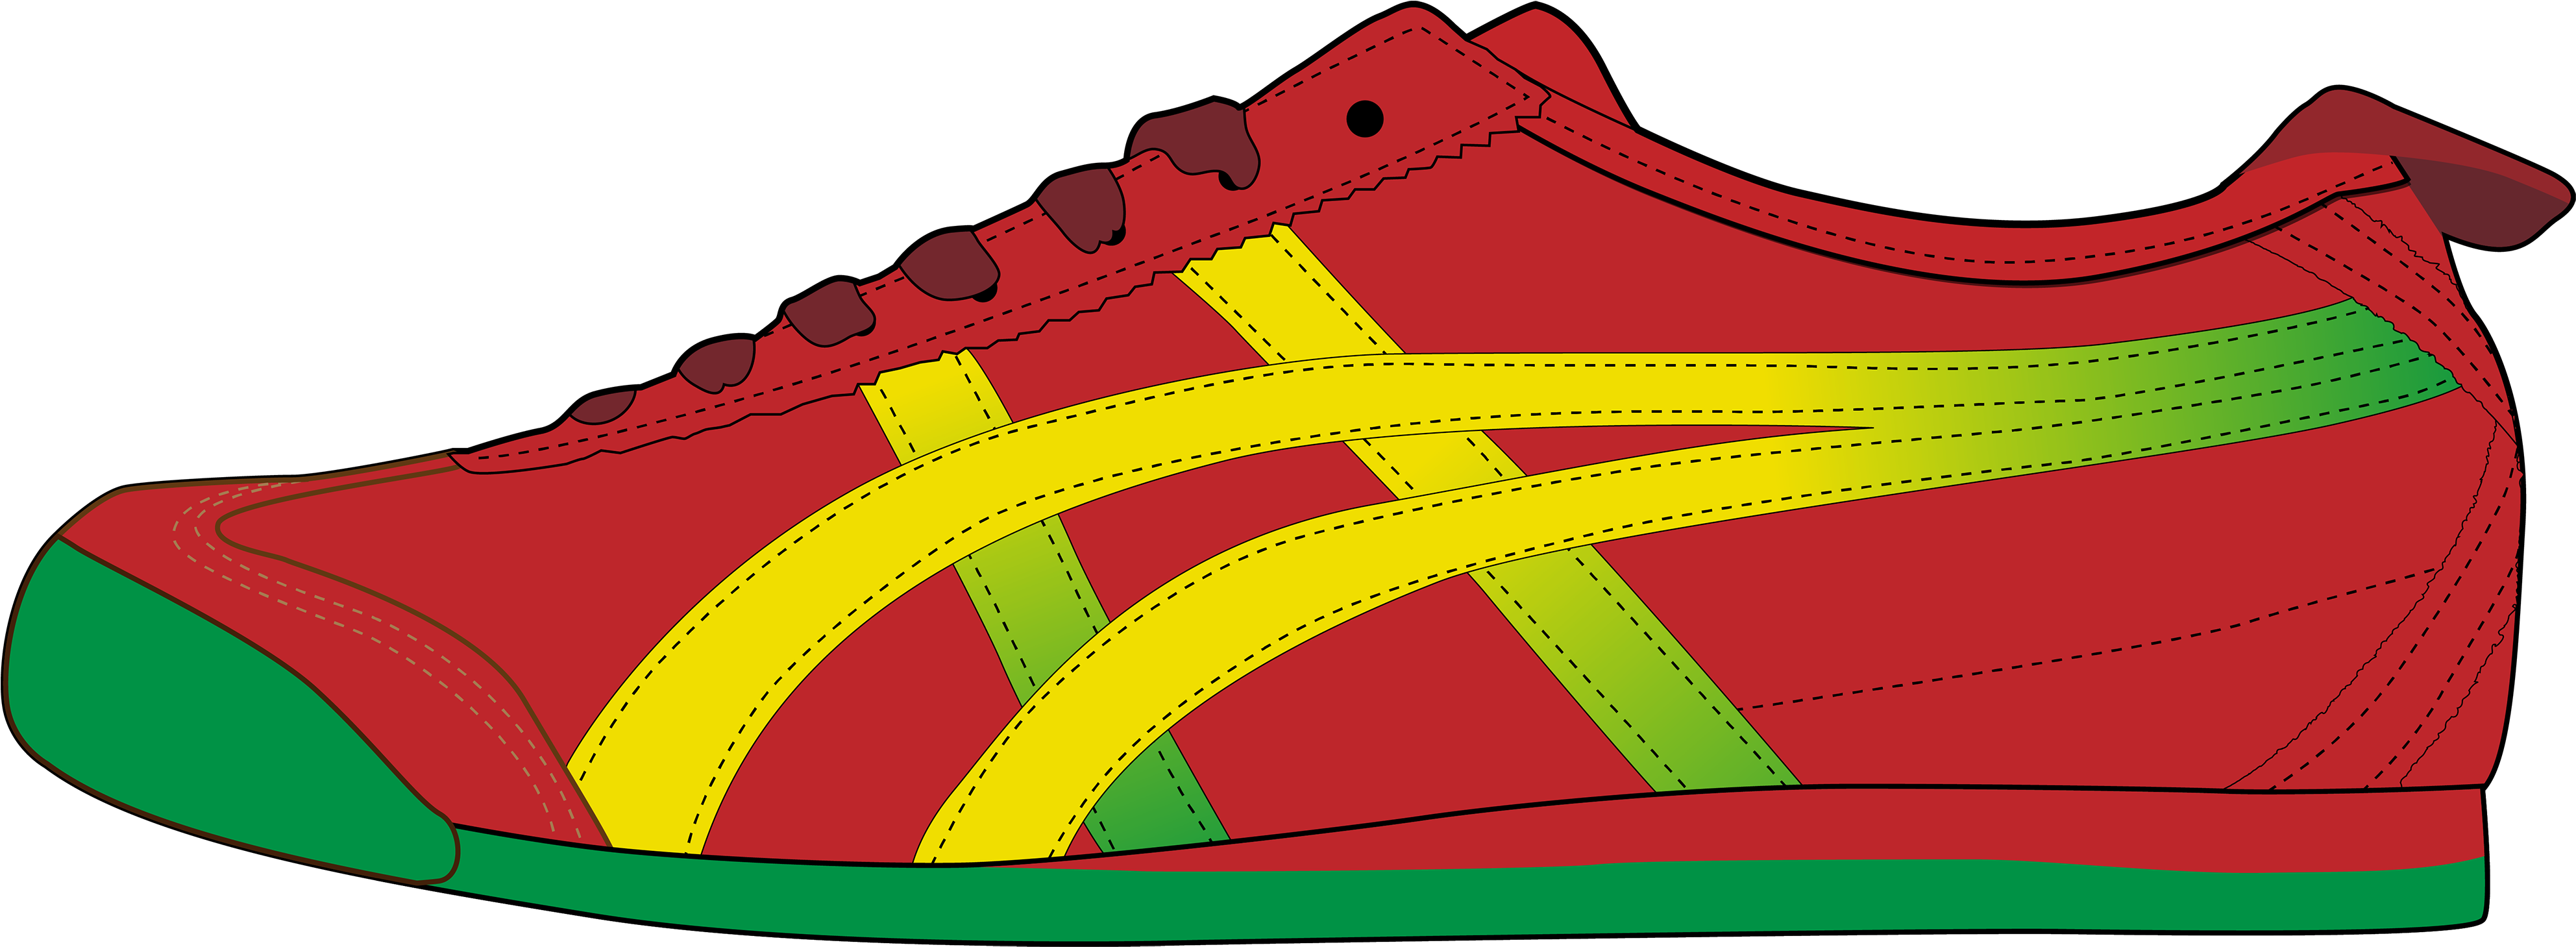 Gym-shoes Clipart Man Clipart - Onitsuka Tiger Mexico 66 (4000x1522)